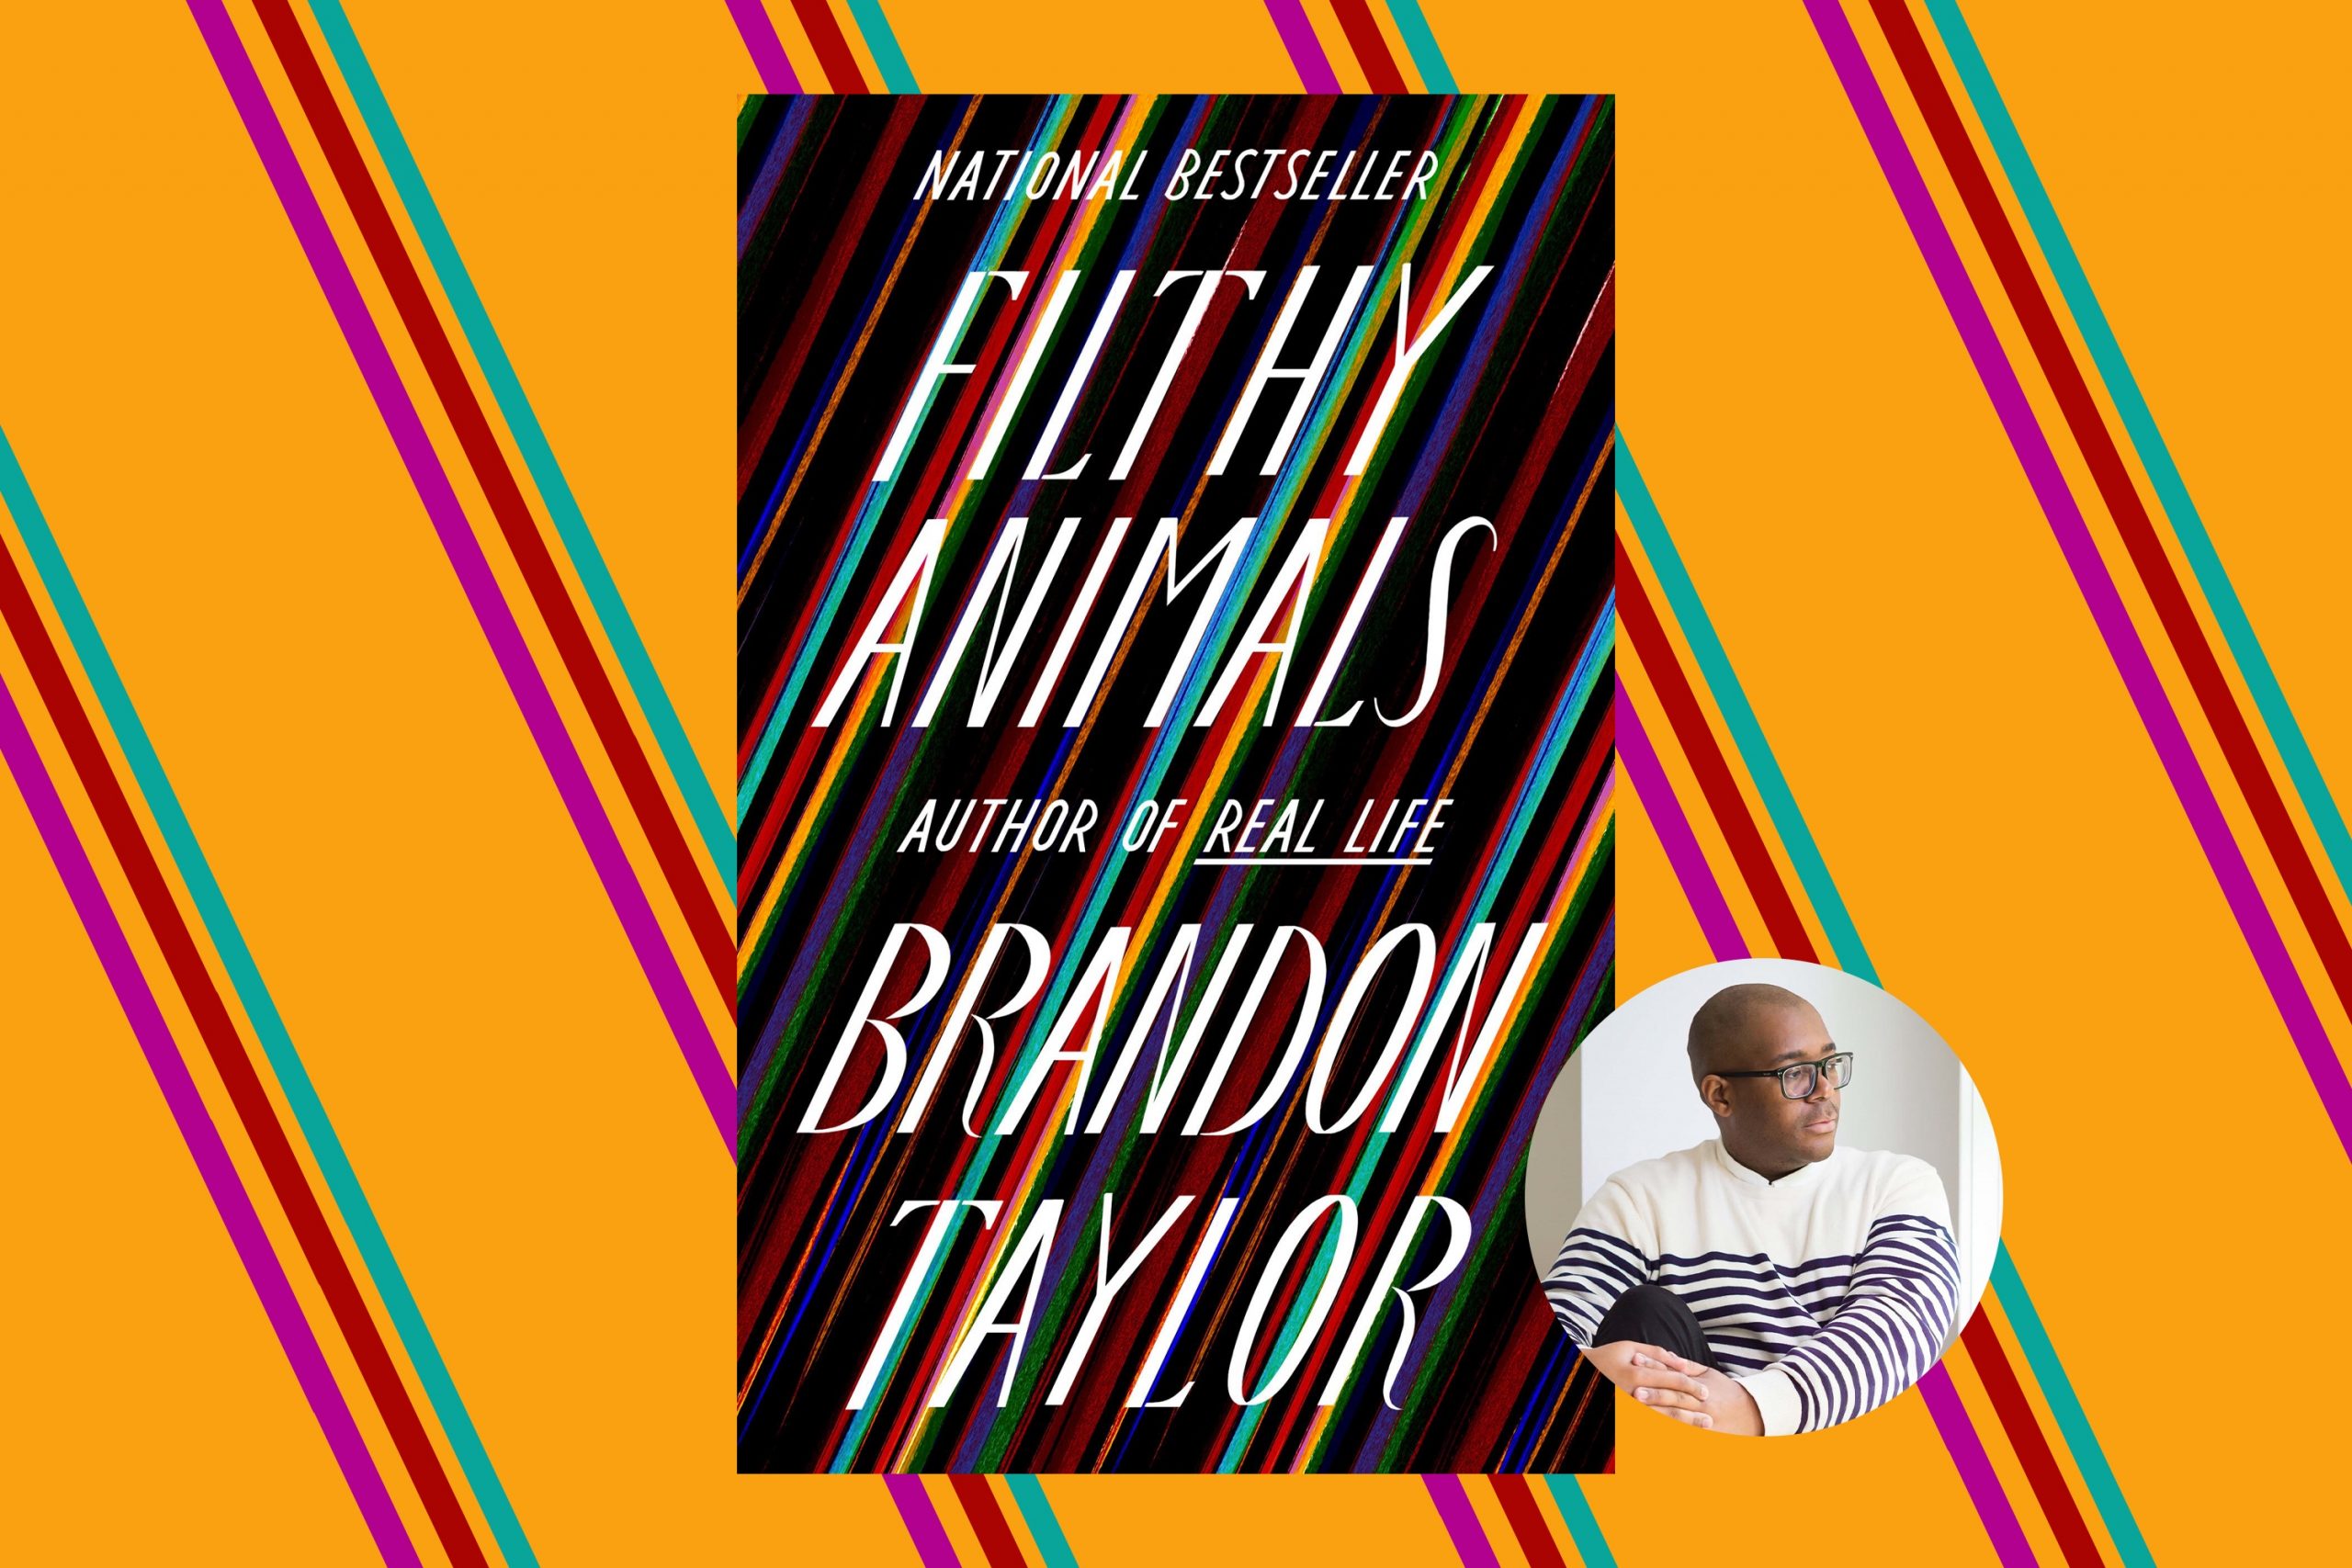 cover of the book "filthy animals" by brandon taylor next to a picture of the author, a Black man with short hair and glasses. the background is deep yellow with multicolored stripes